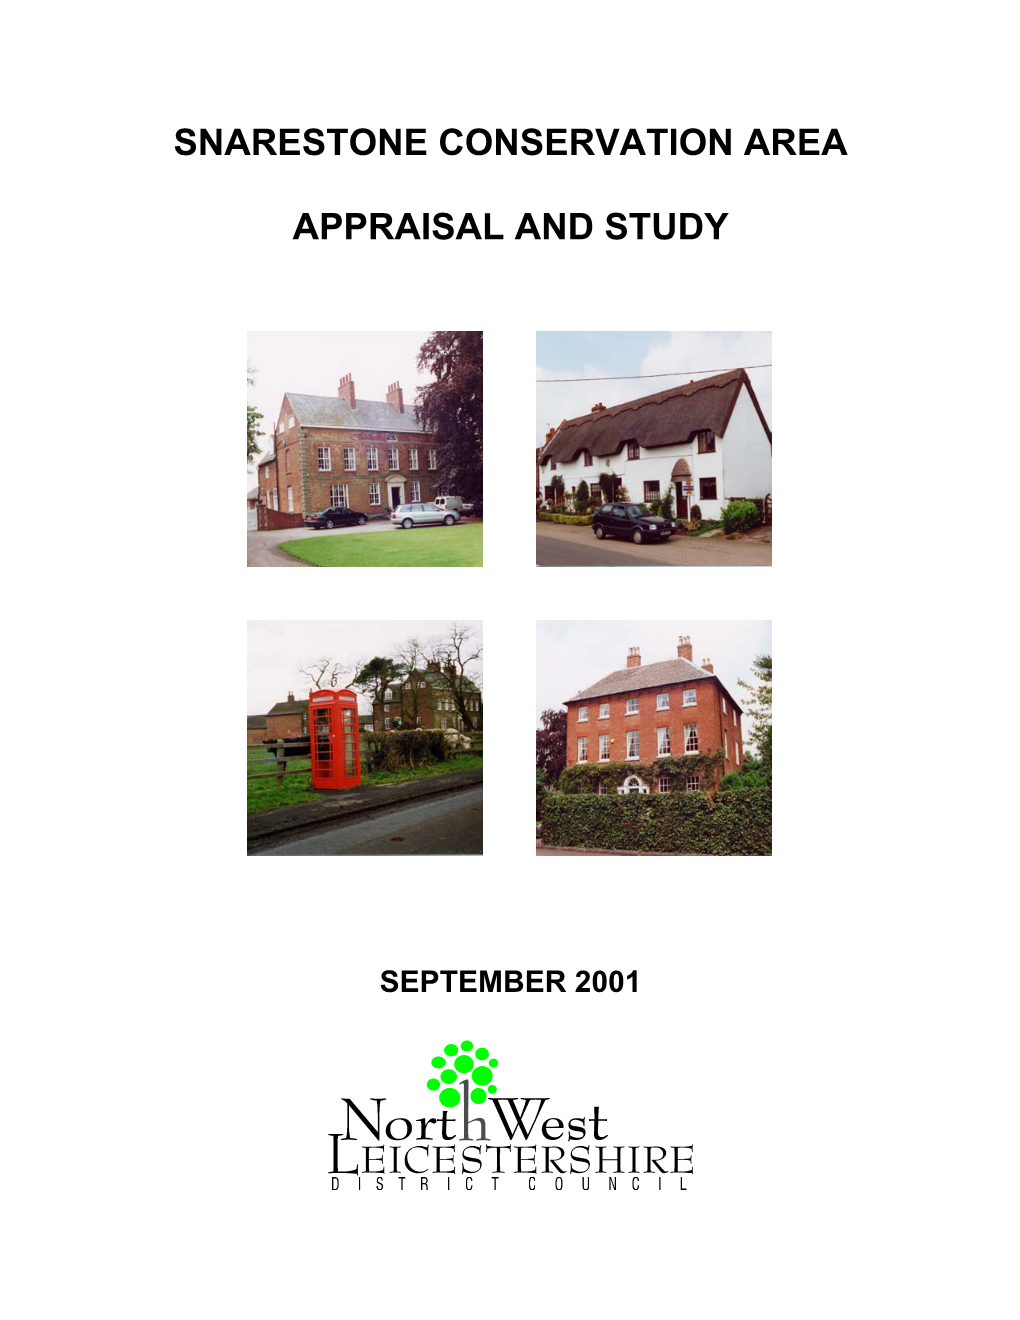 Snarestone Conservation Area Appraisal and Study